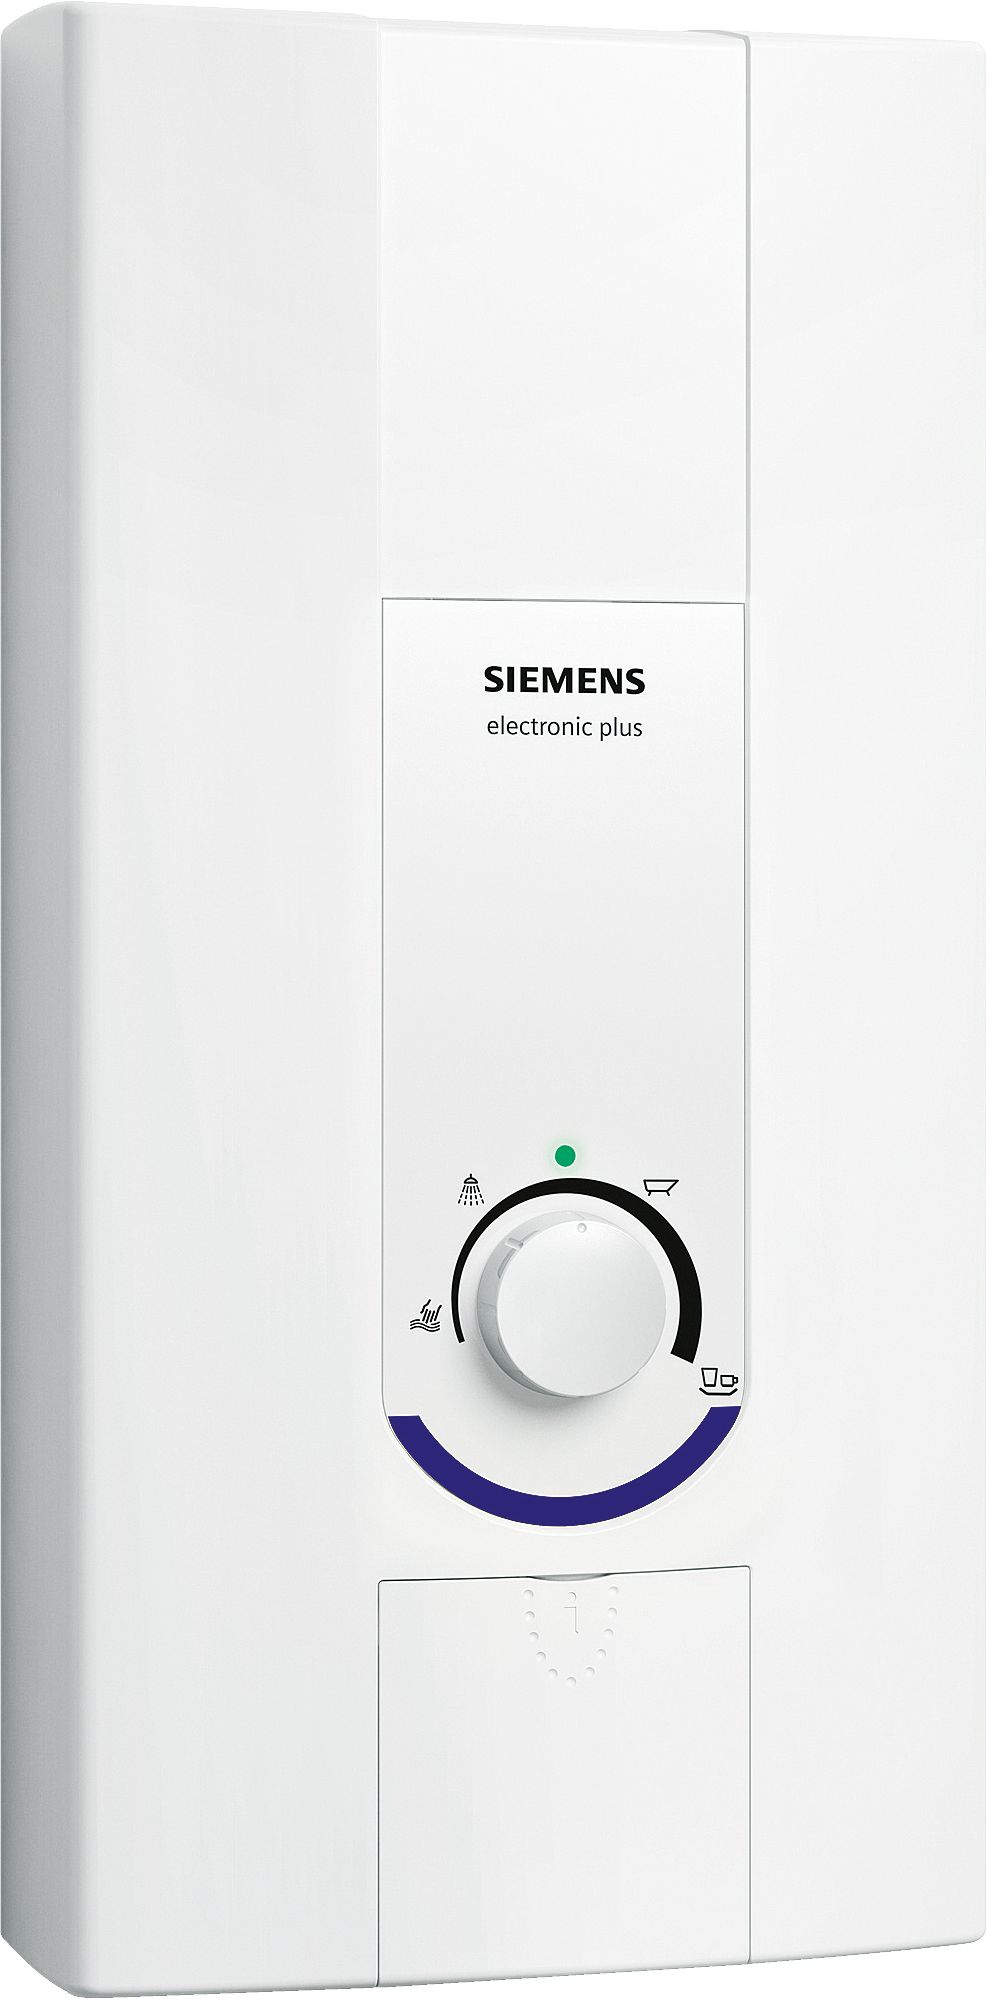 Electronic instantaneous water heater